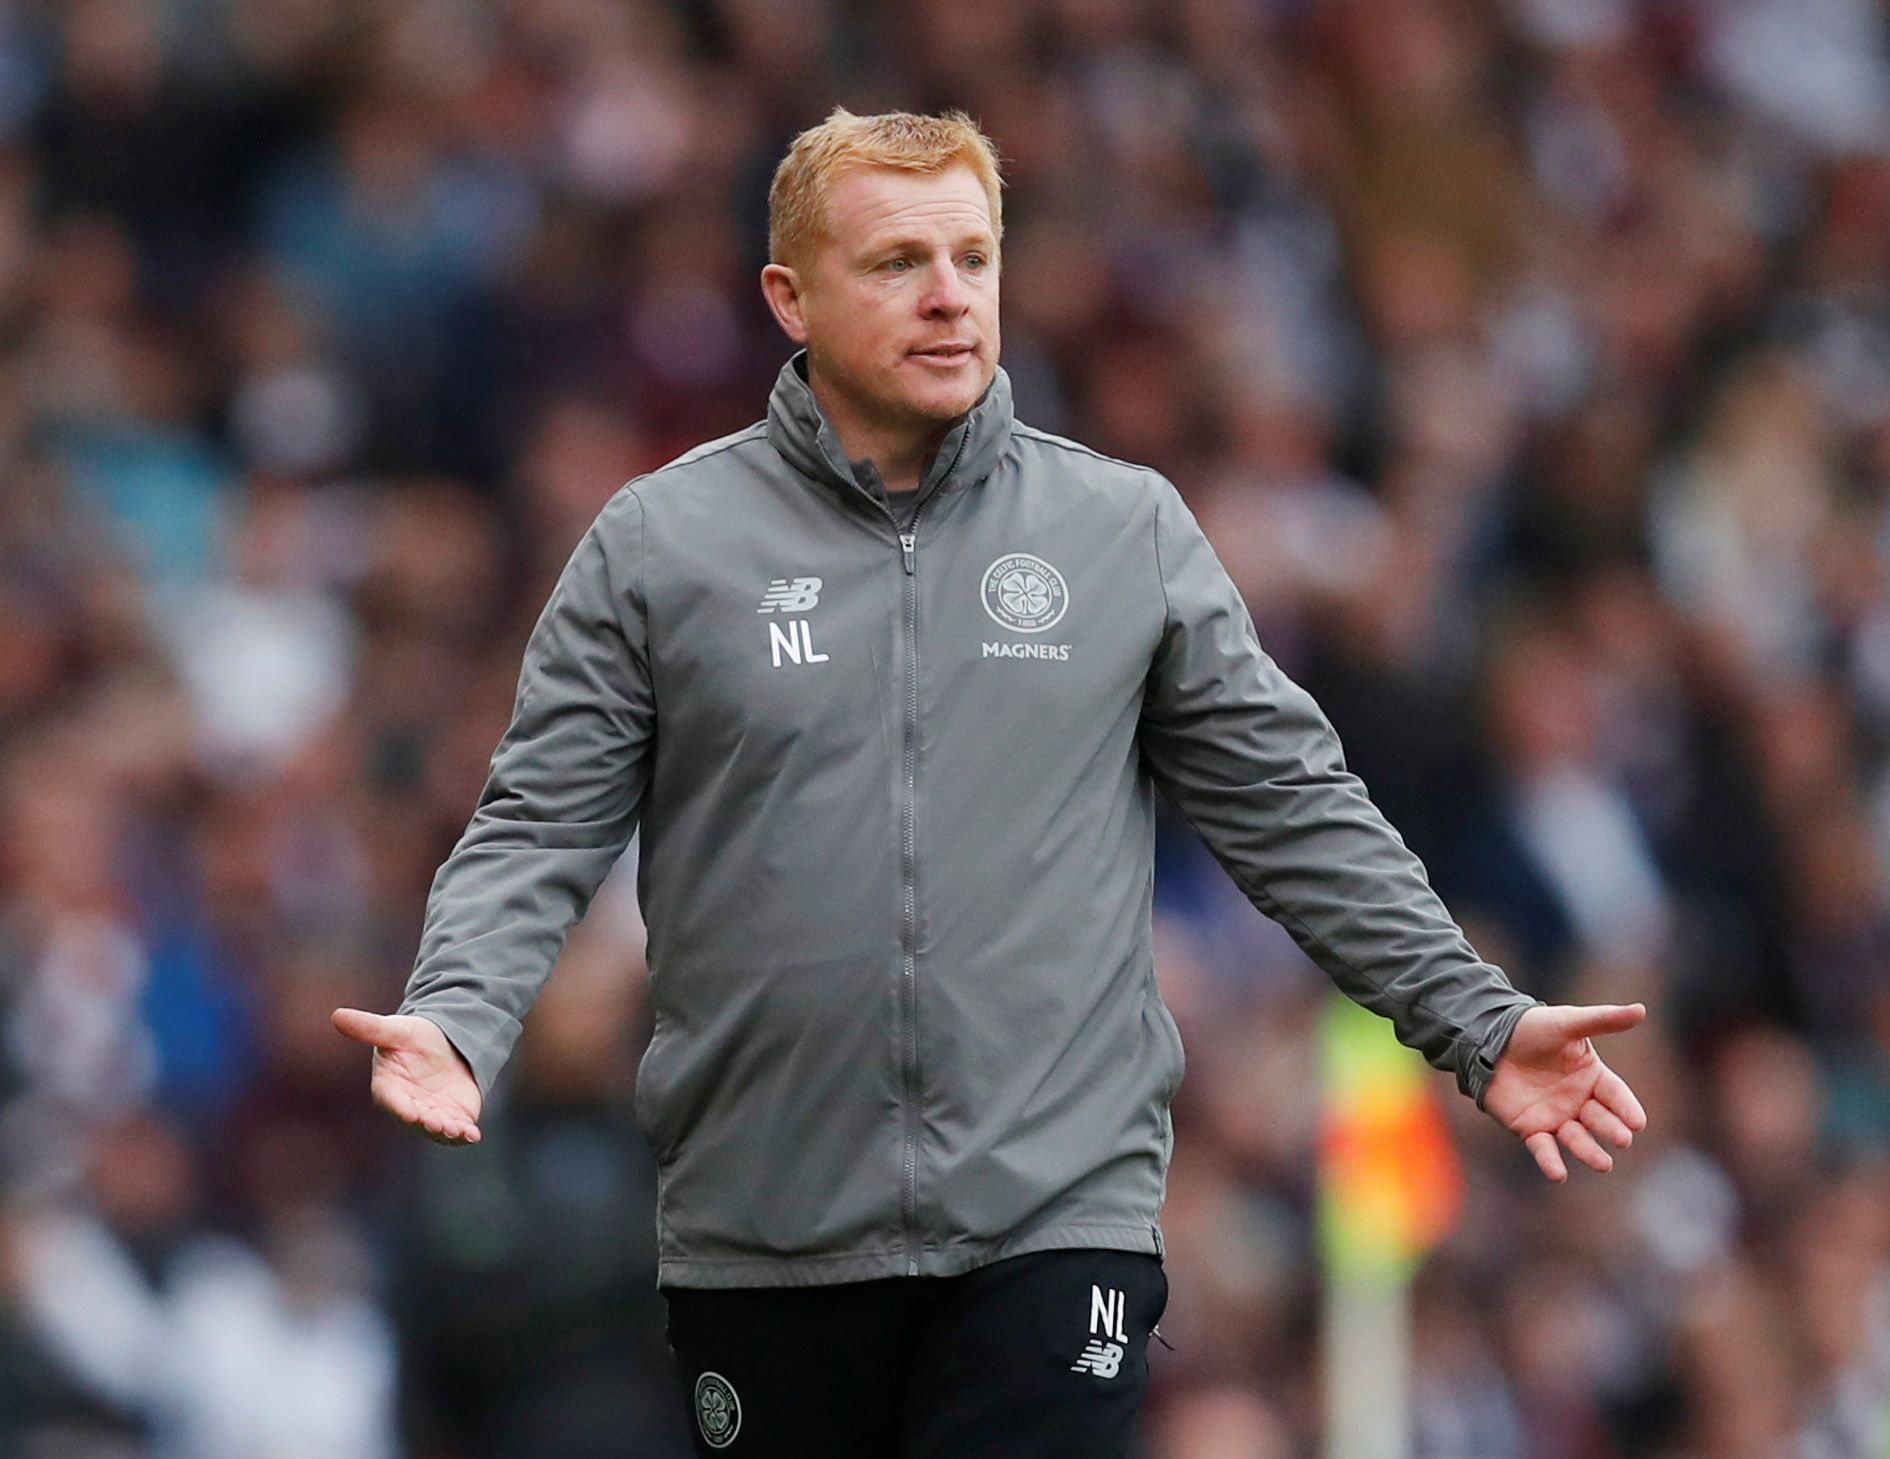 Soccer Football - Scottish Cup Final - Heart of Midlothian v Celtic - Hampden Park, Glasgow, Britain - May 25, 2019  Celtic manager Neil Lennon reacts during the match        REUTERS/Russell Cheyne